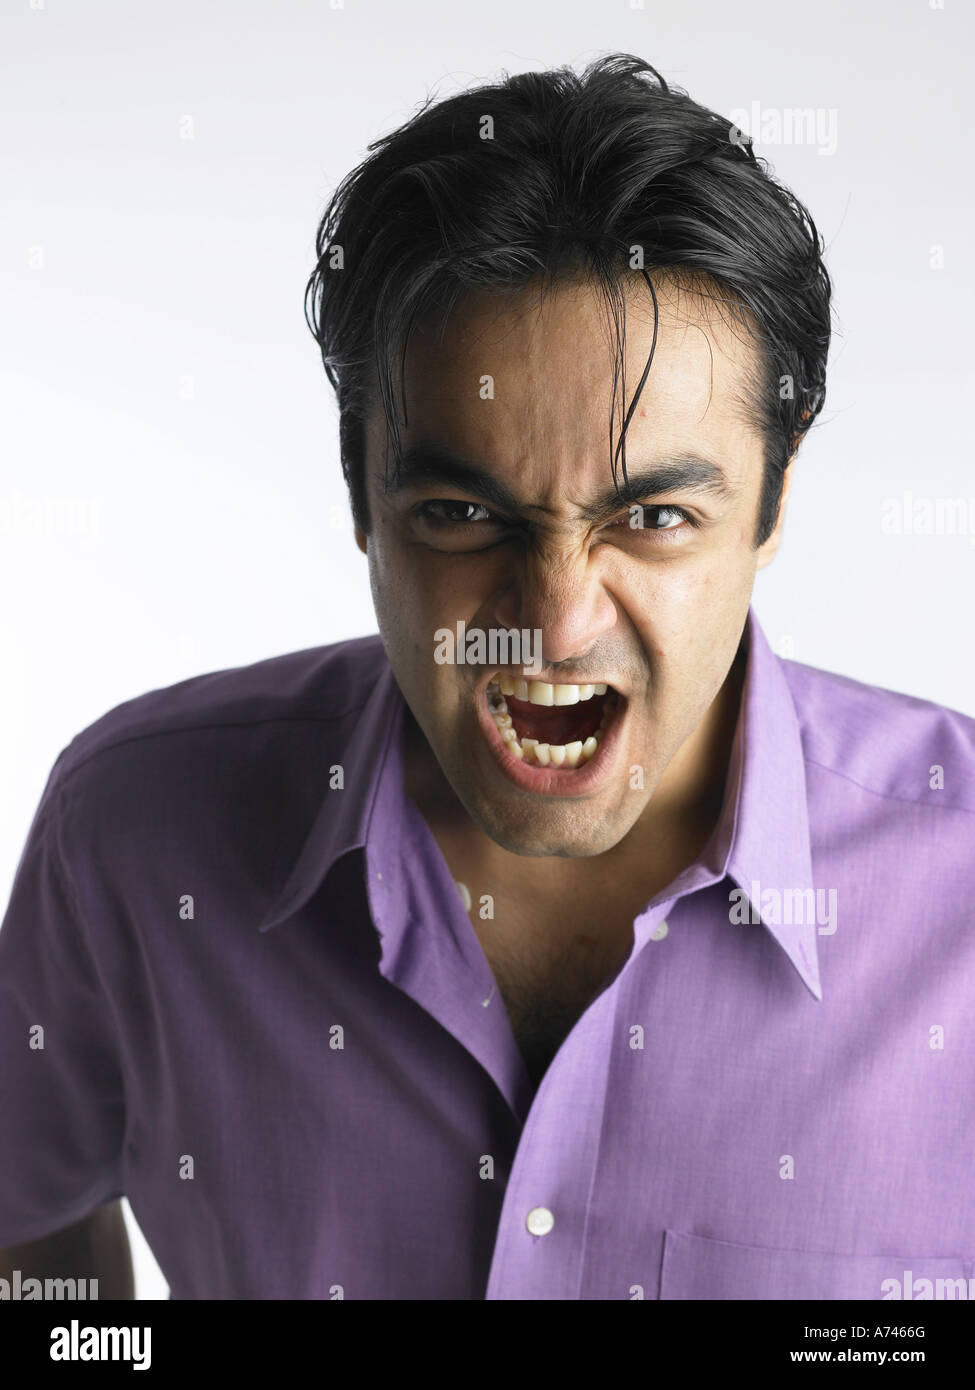 VDA 201939 Close up of South Asian Indian man showing frustrated facial expression MR 702A Stock Photo